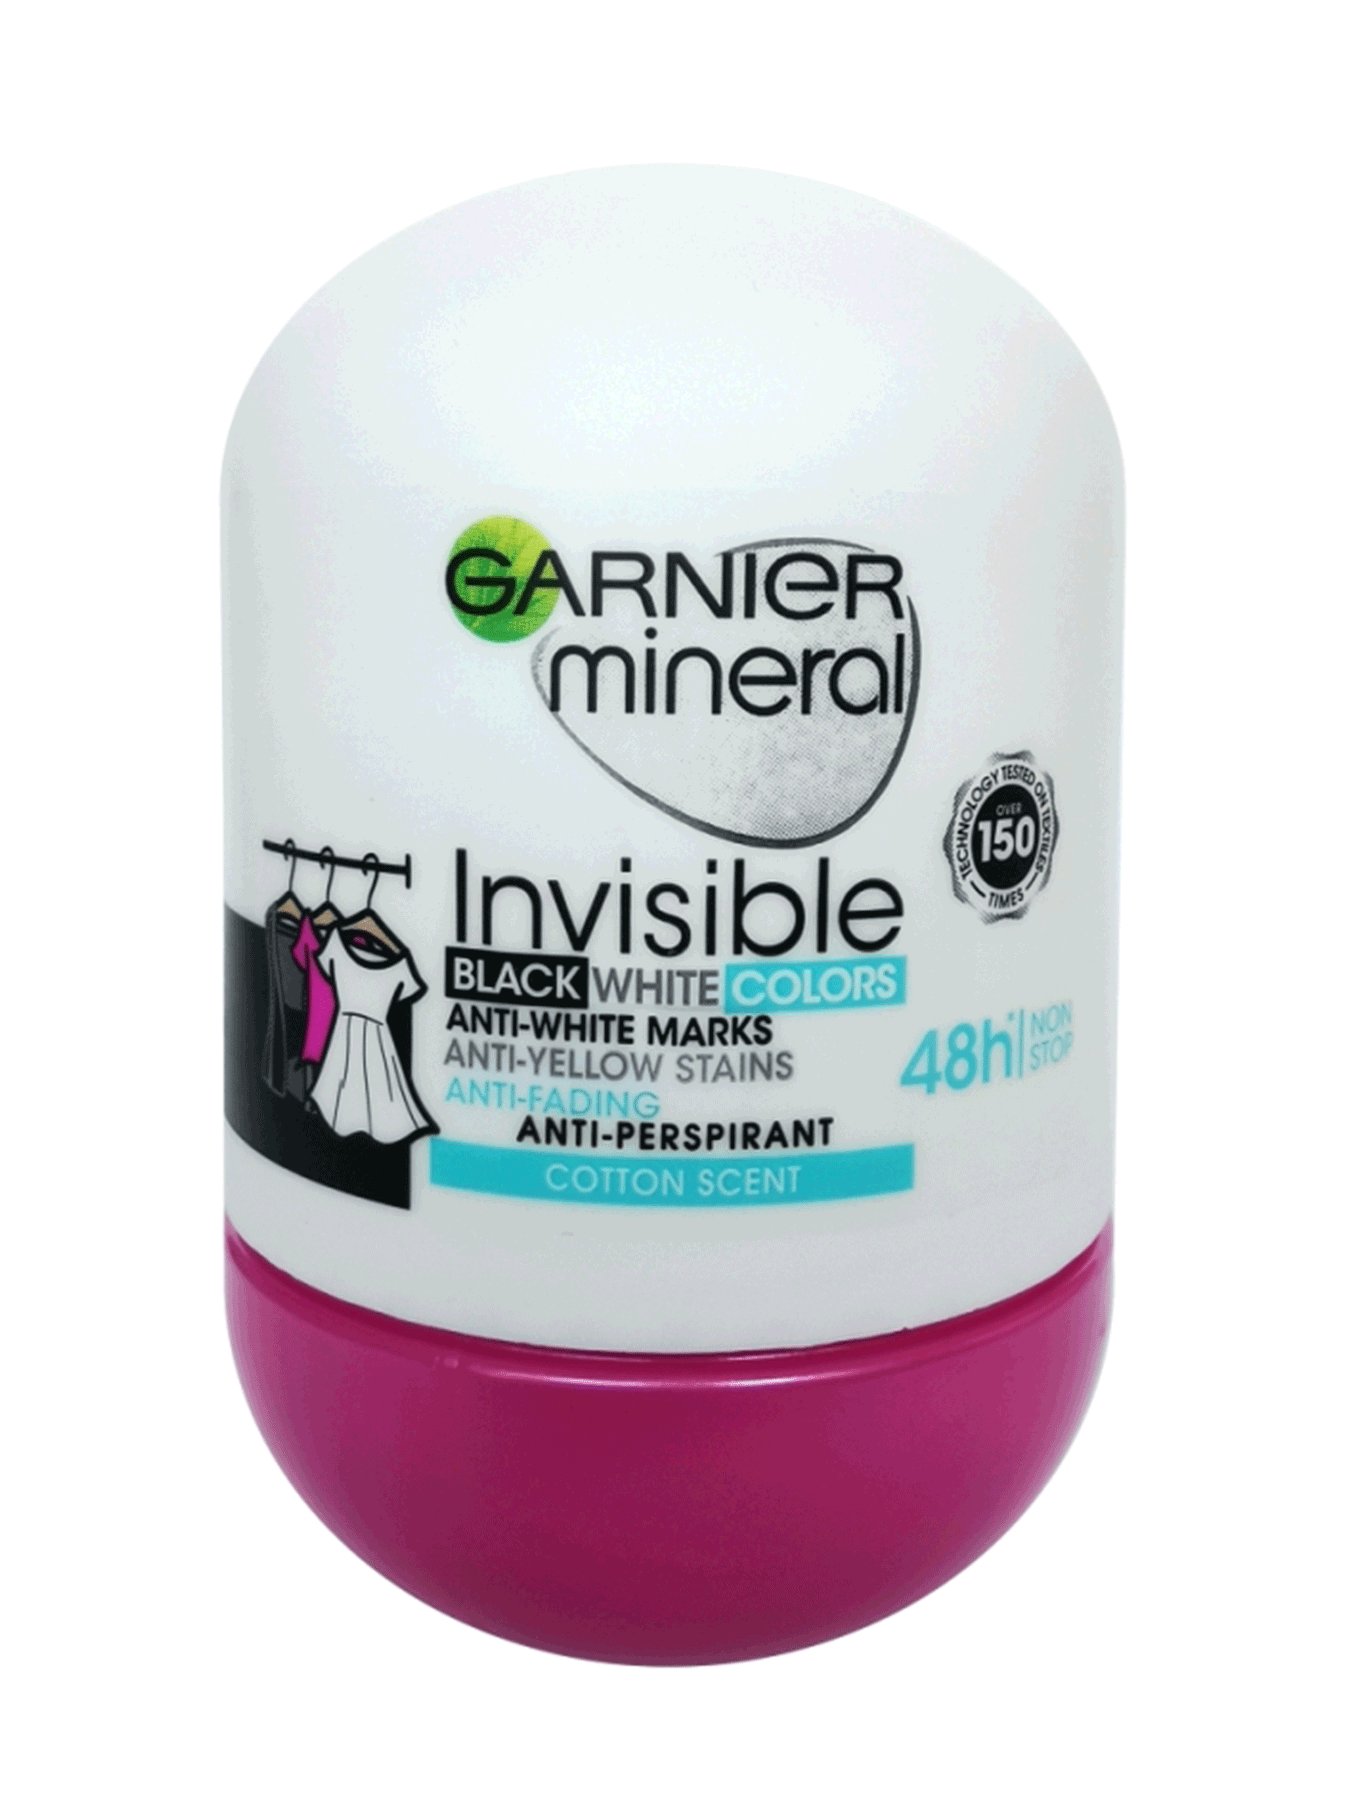 Garnier Mineral Deo Invisible Black, White & Colors Cotton 48h antiperspirant Roll-on